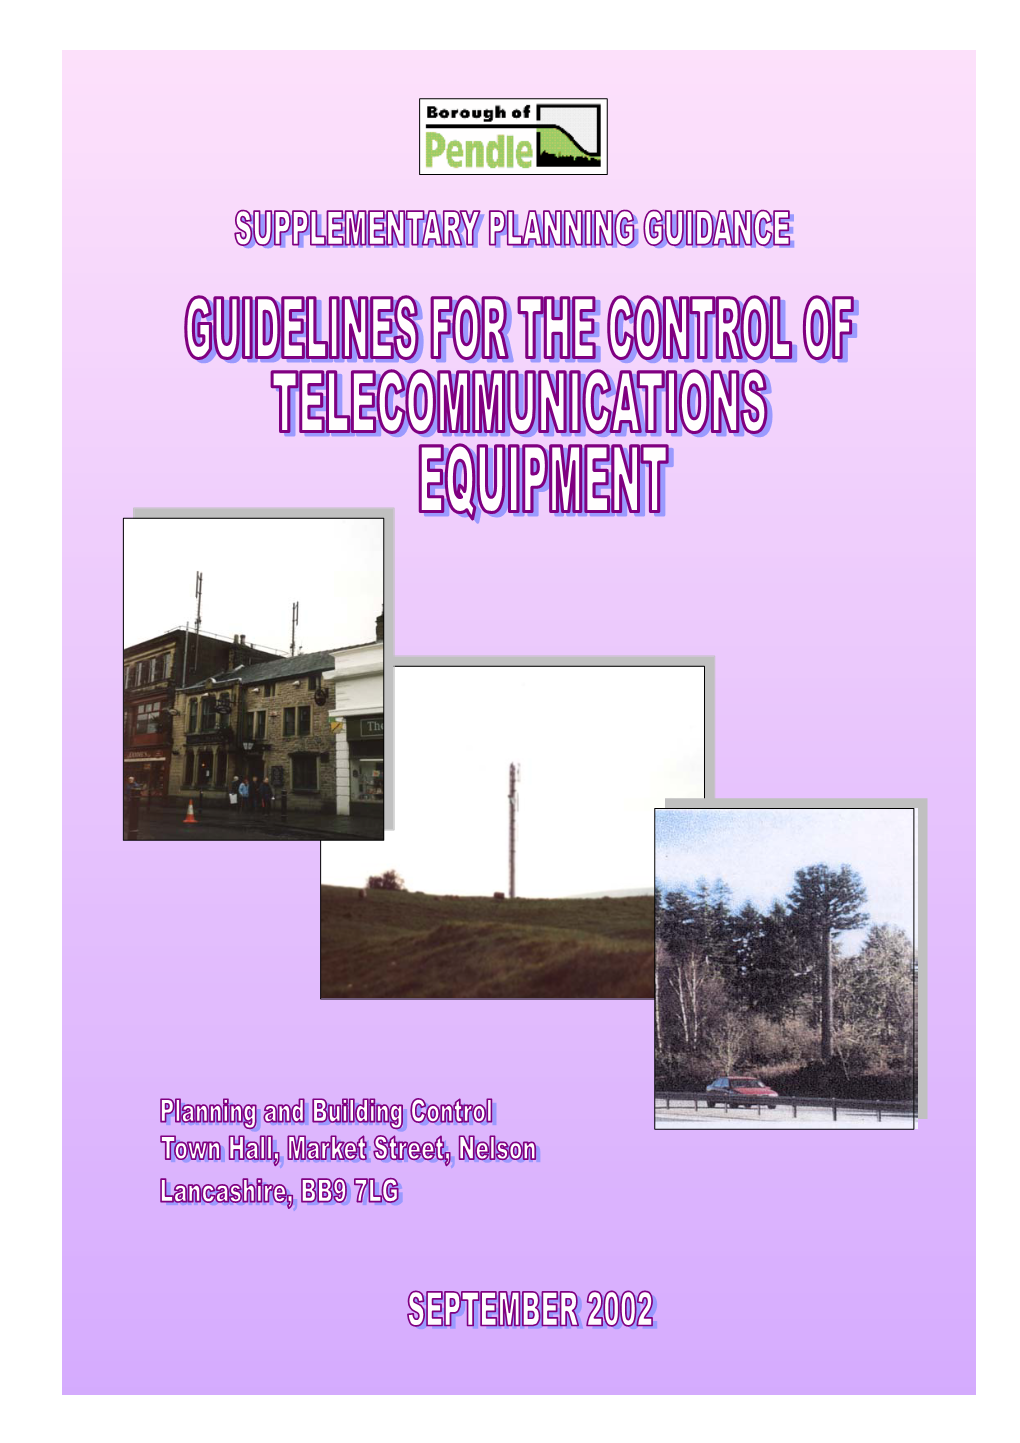 Download Supplementary Planning Guidance for Telecommunications